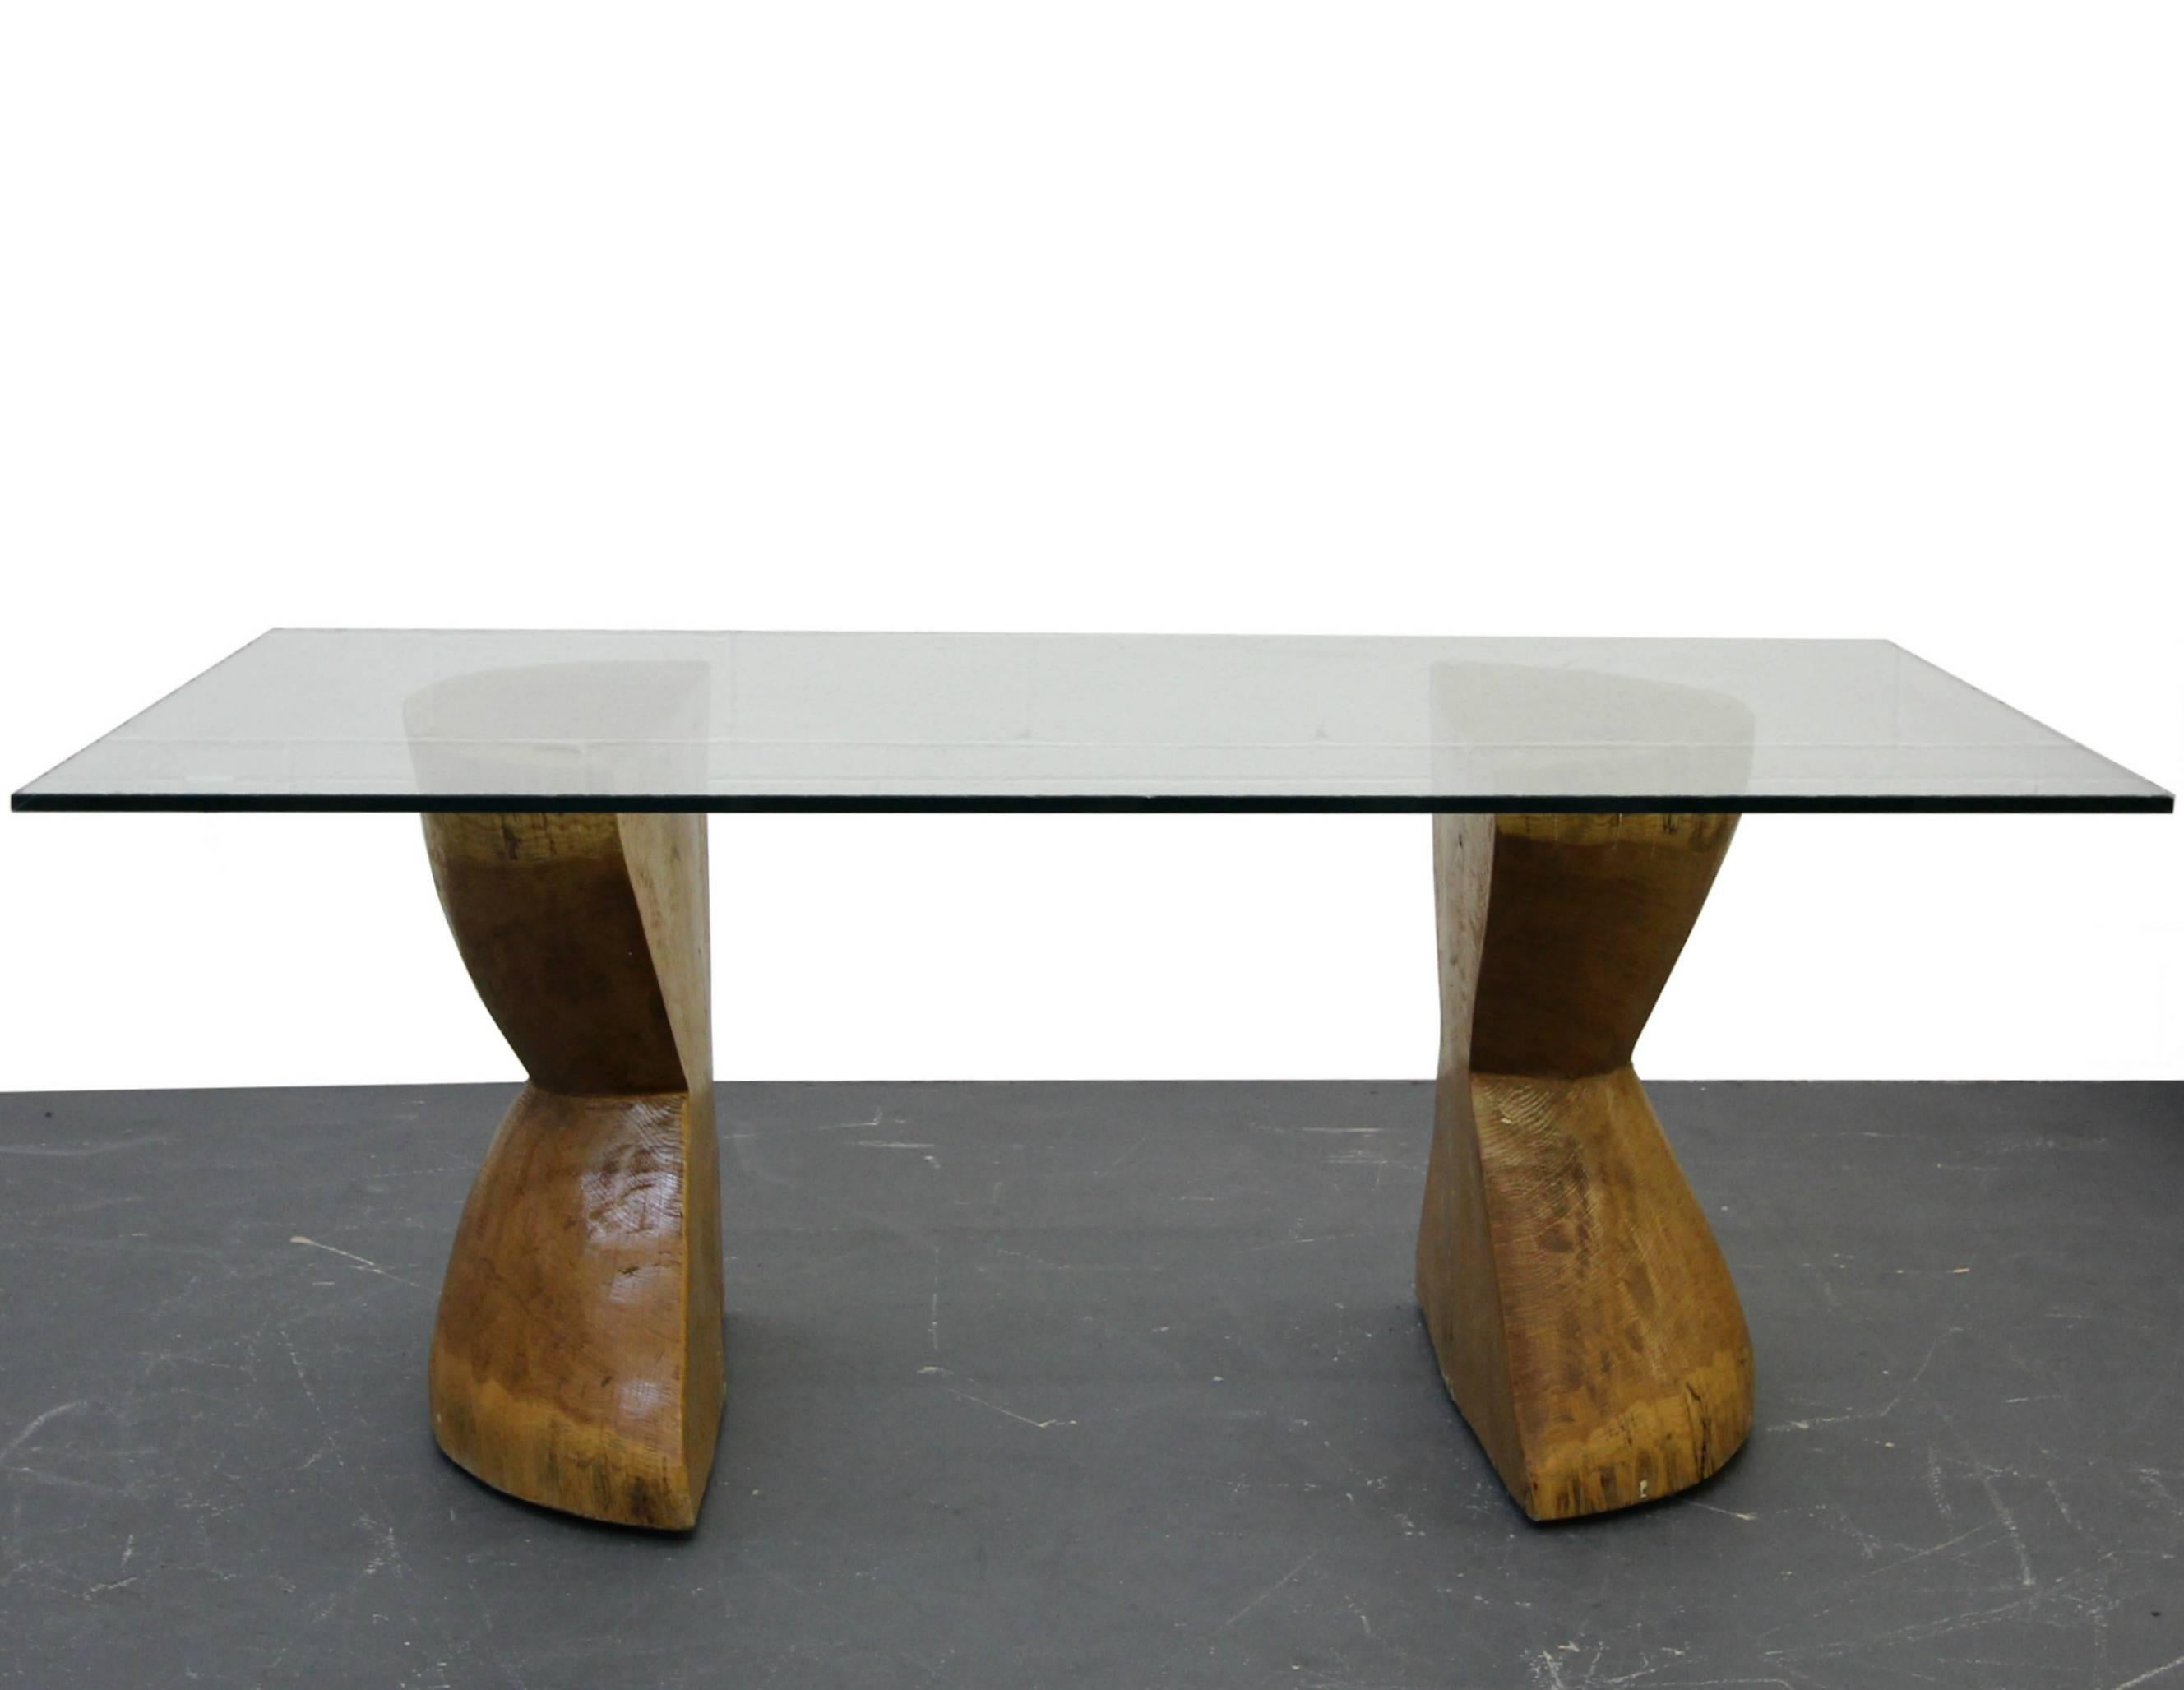 20th Century Pair of Raw Live Edge Wood Hourglass Dining Table Pedestals For Sale